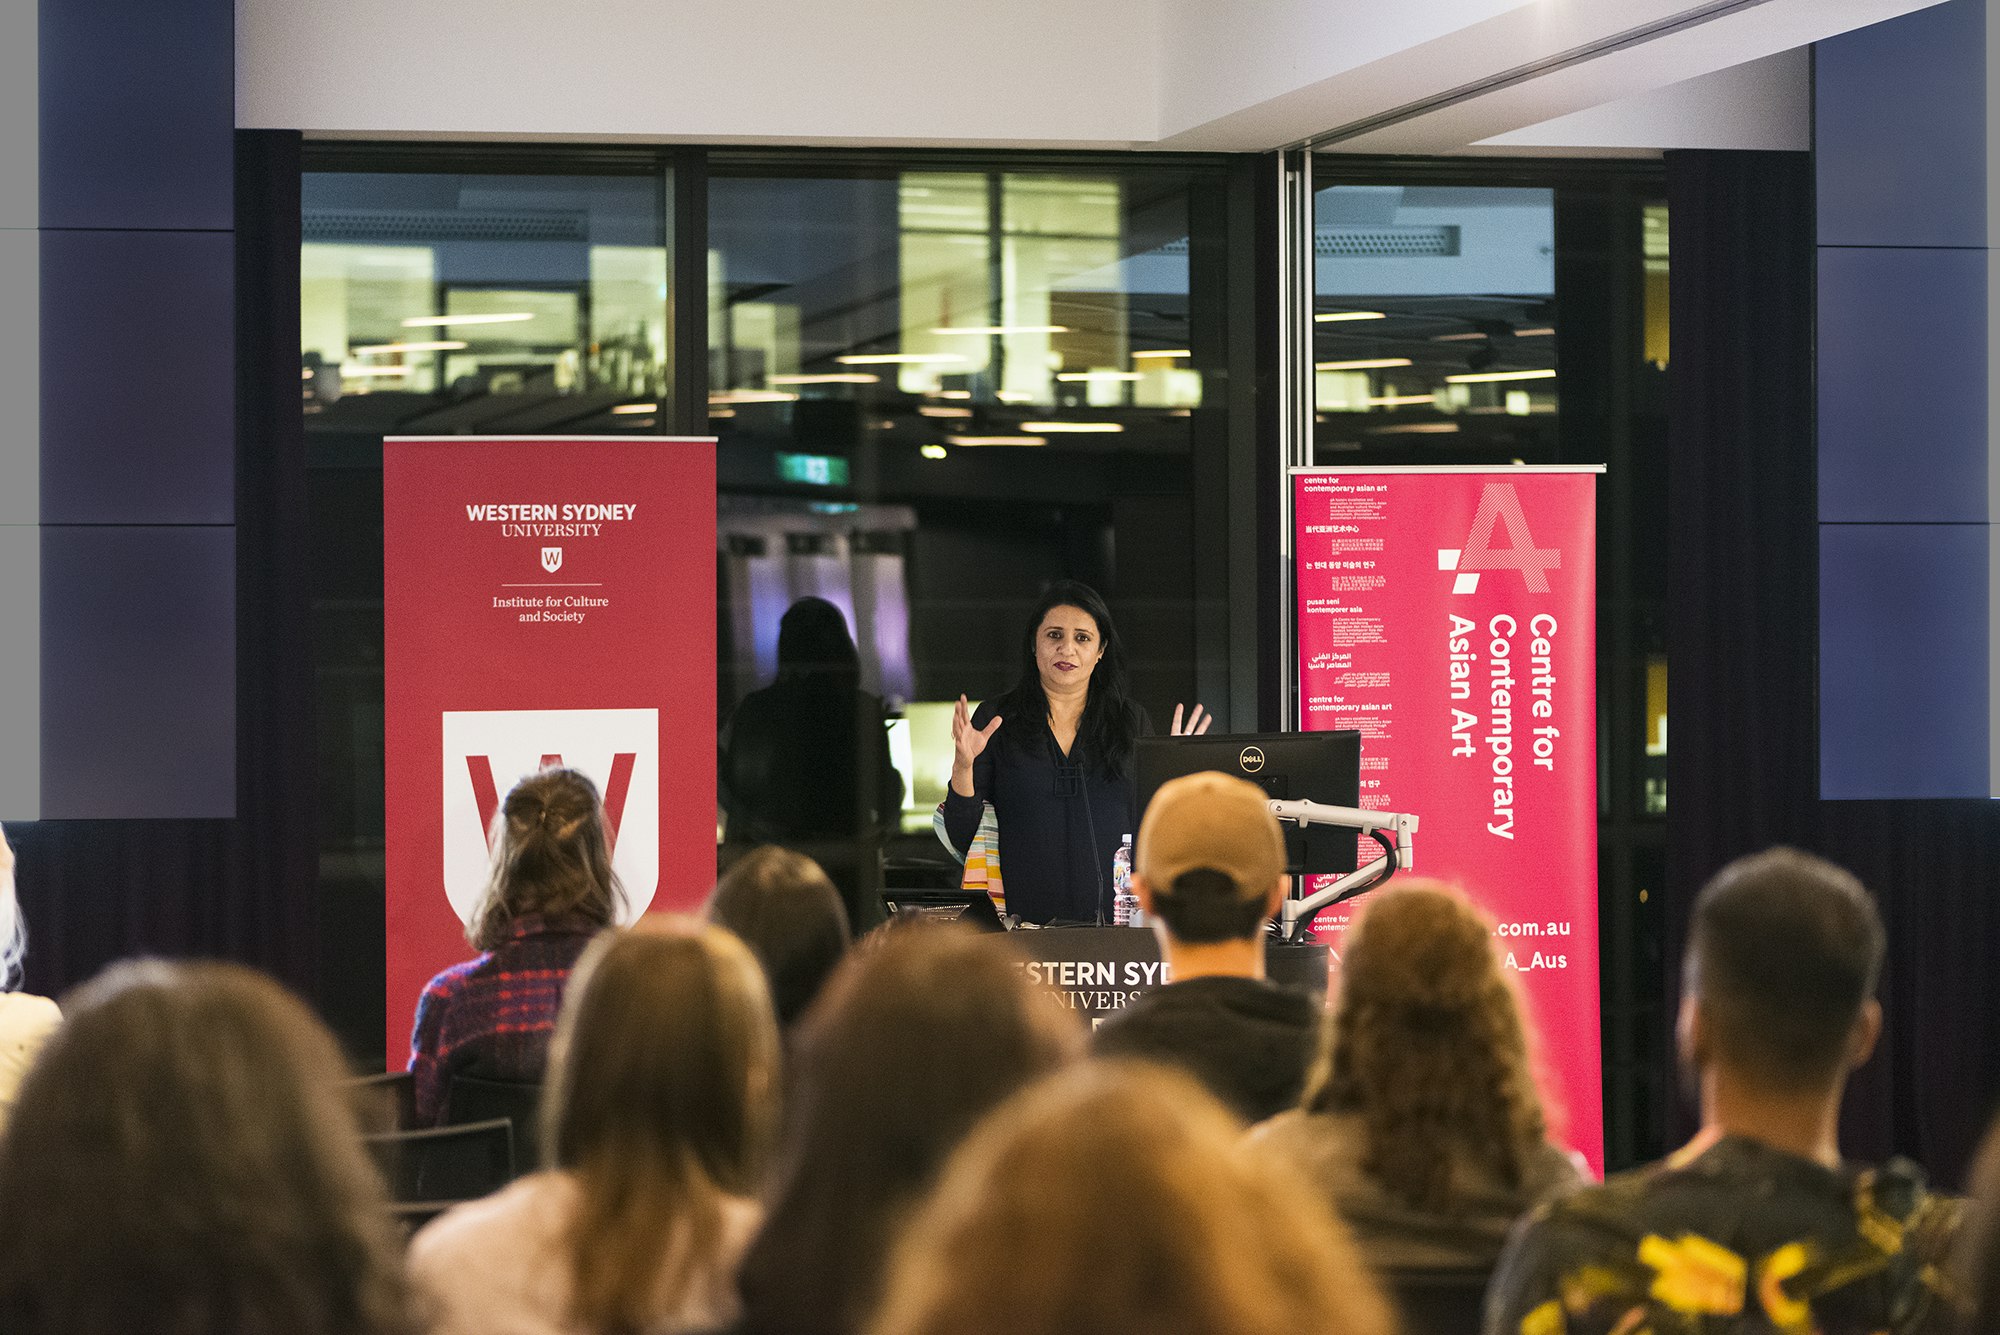 A female-presenting speaker with long black hair gestures to an audience sitting in front of her. Behind her is a red banner reading 'Western Sydney University' and a pink banner reading '4A Centre for Contemporary Asian Art'.